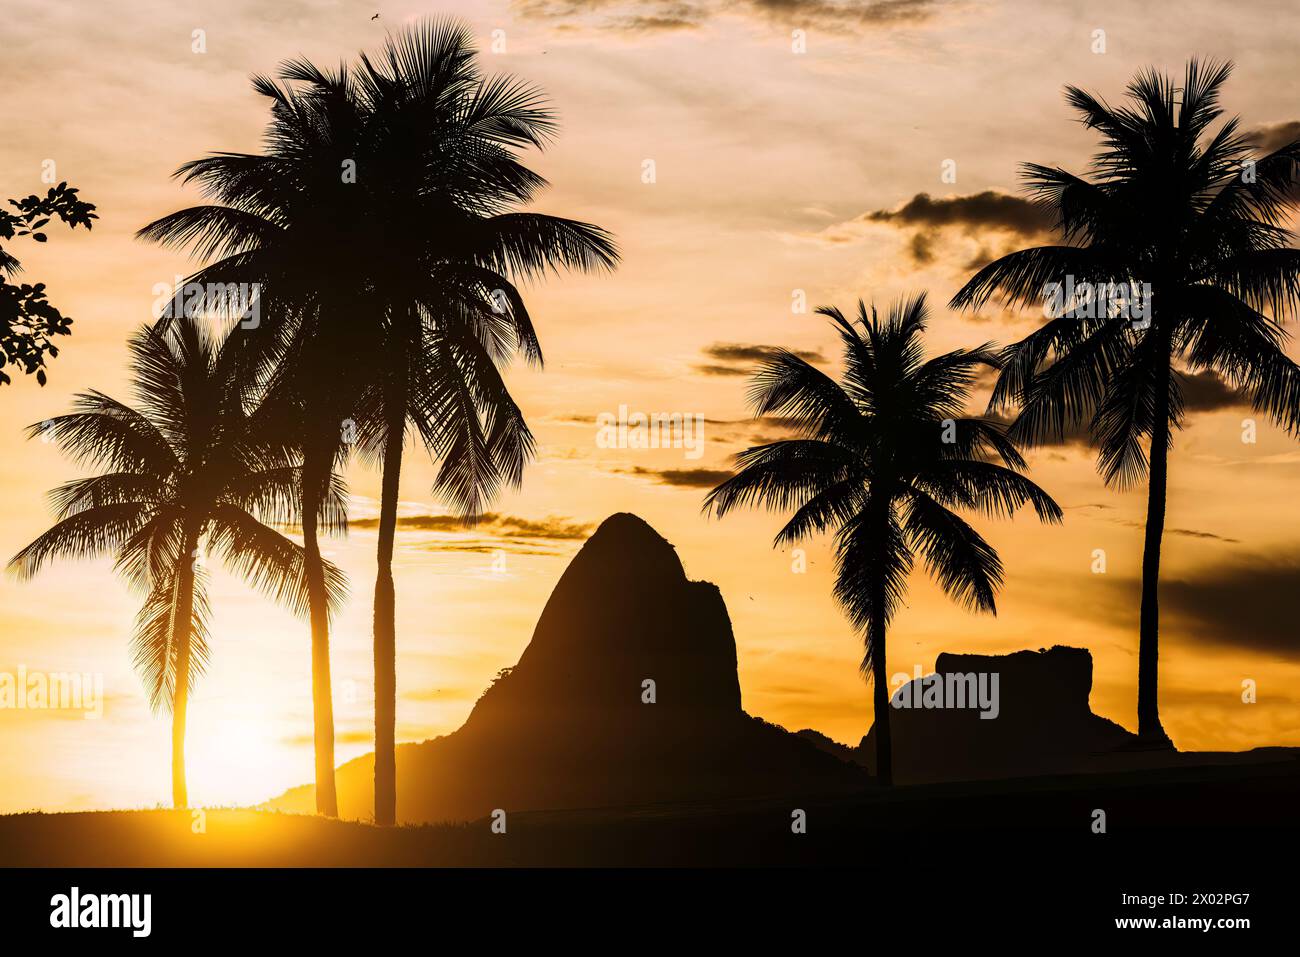 Sunset with the iconic Two Brothers Mountains in the backgrounds with palm trees in the foreground, Rio de Janeiro, Brazil, South America Stock Photo